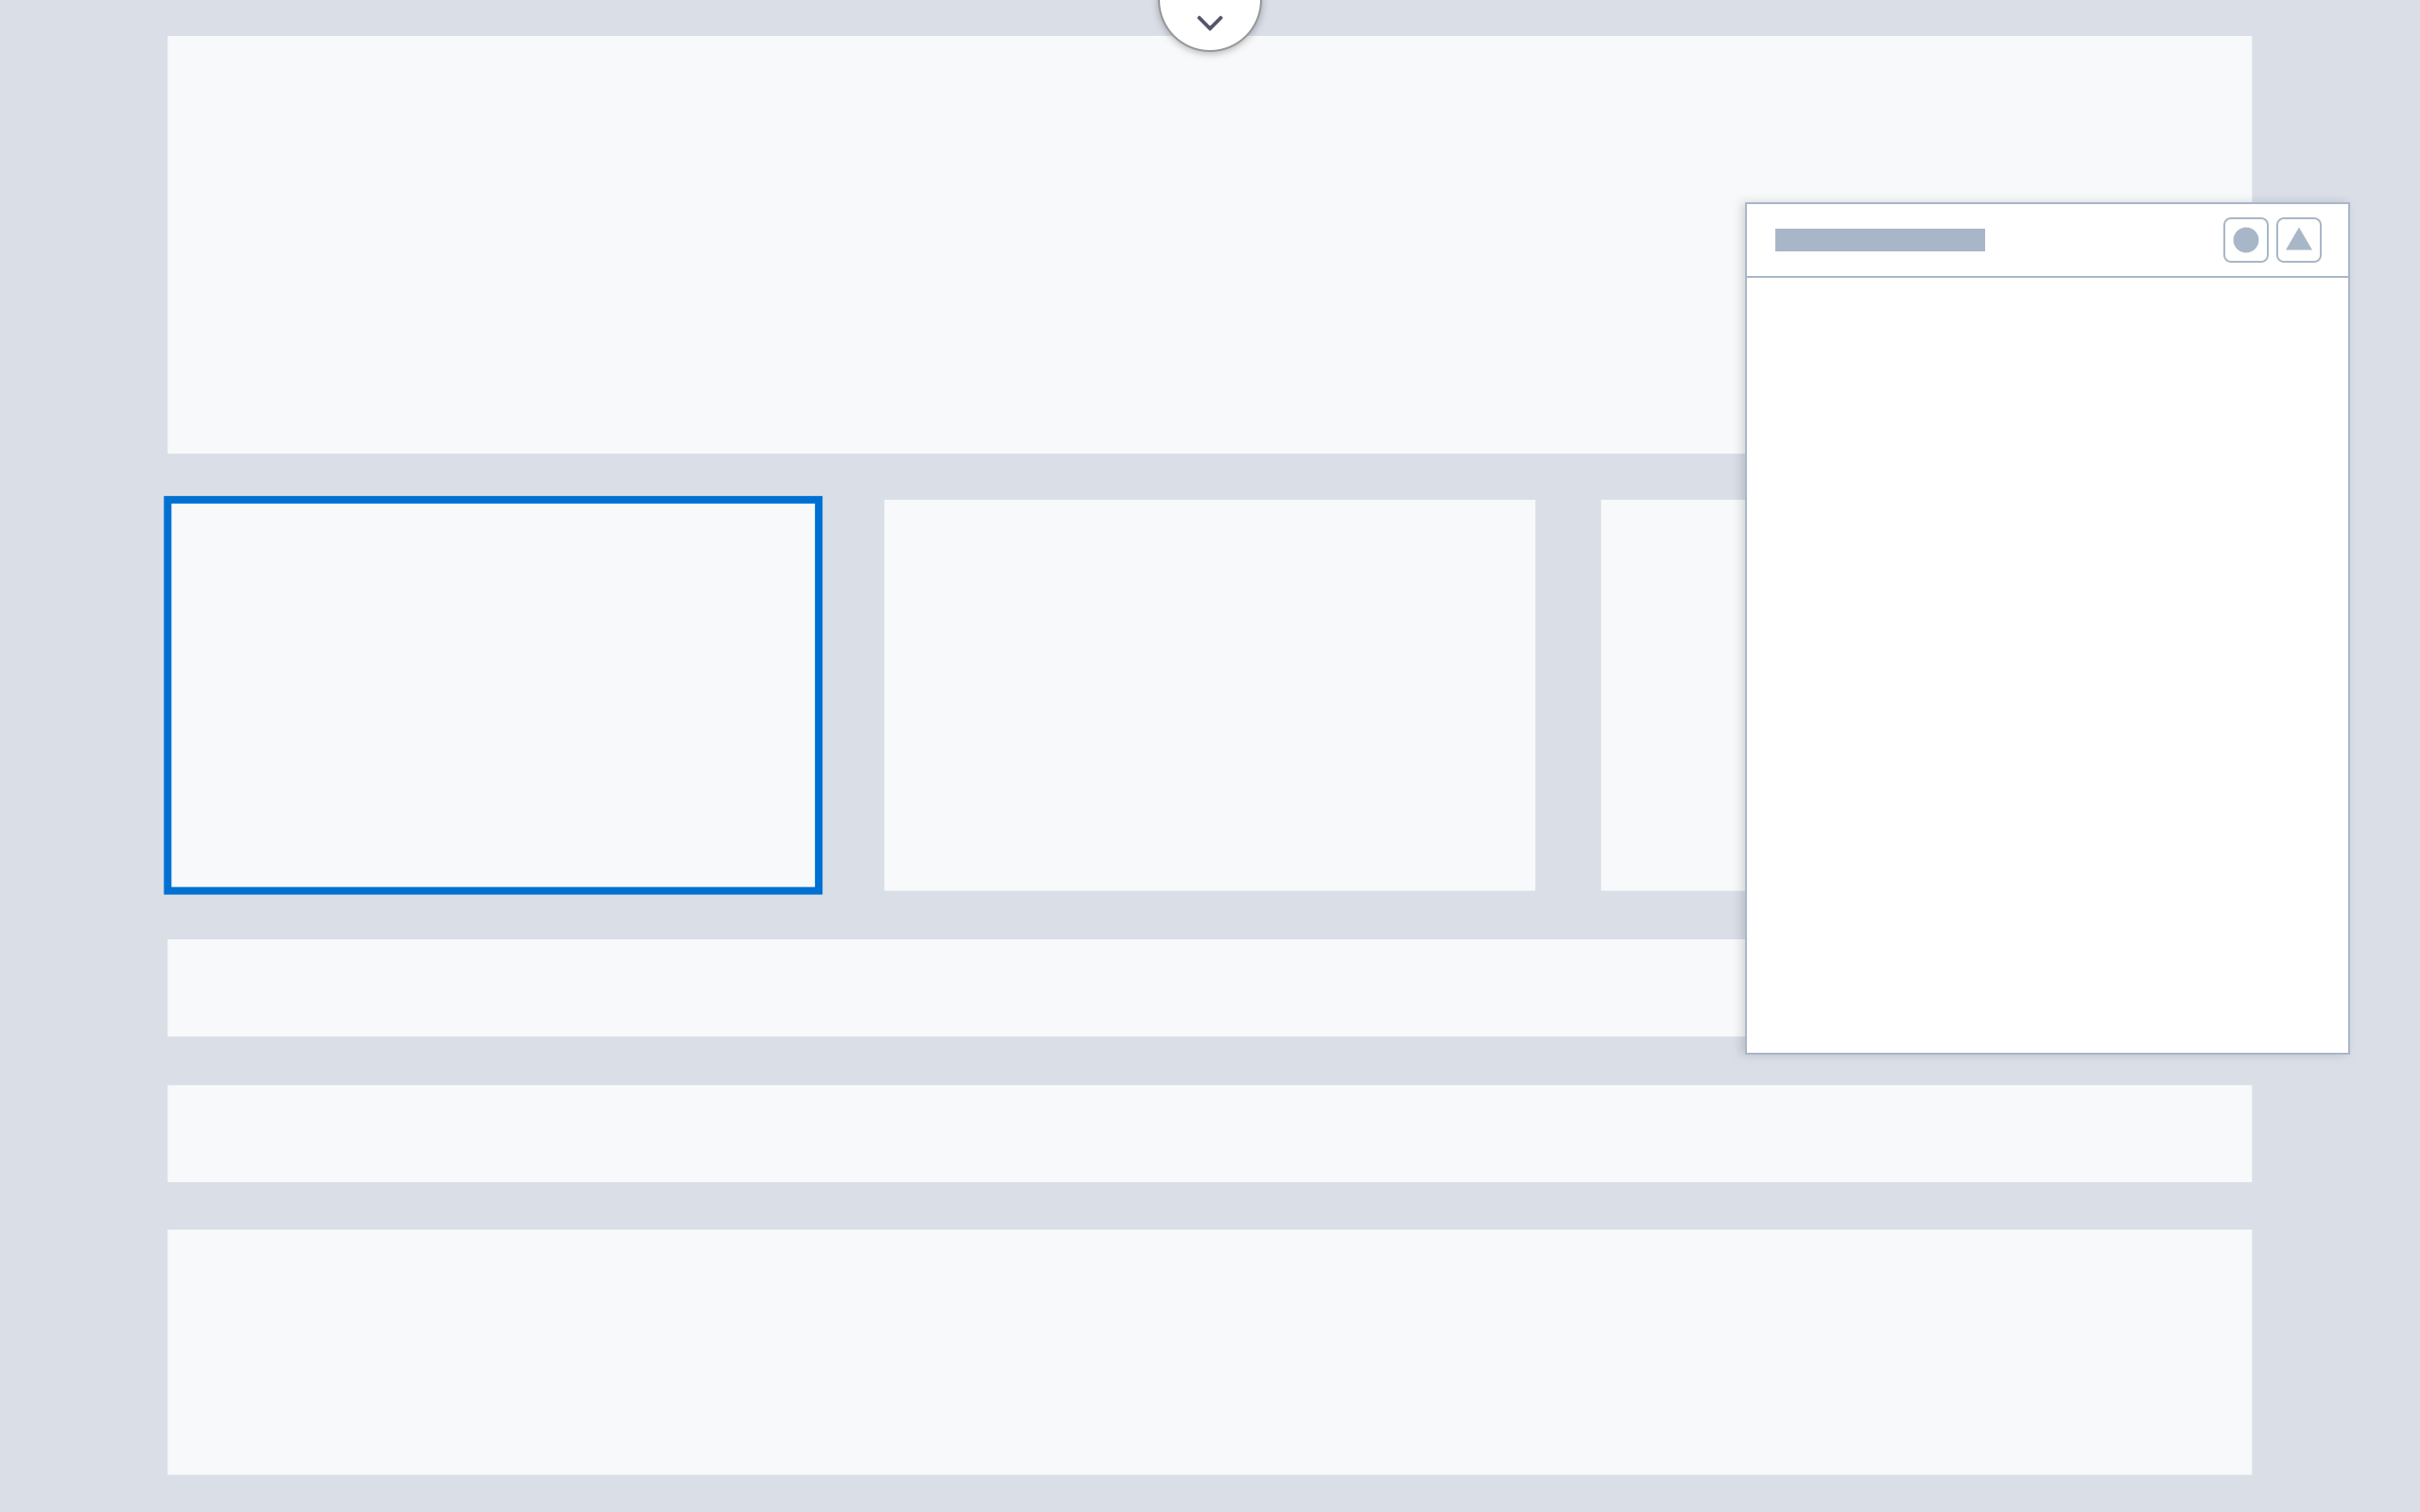 Wireframe showing a full-screen canvas with floating panel